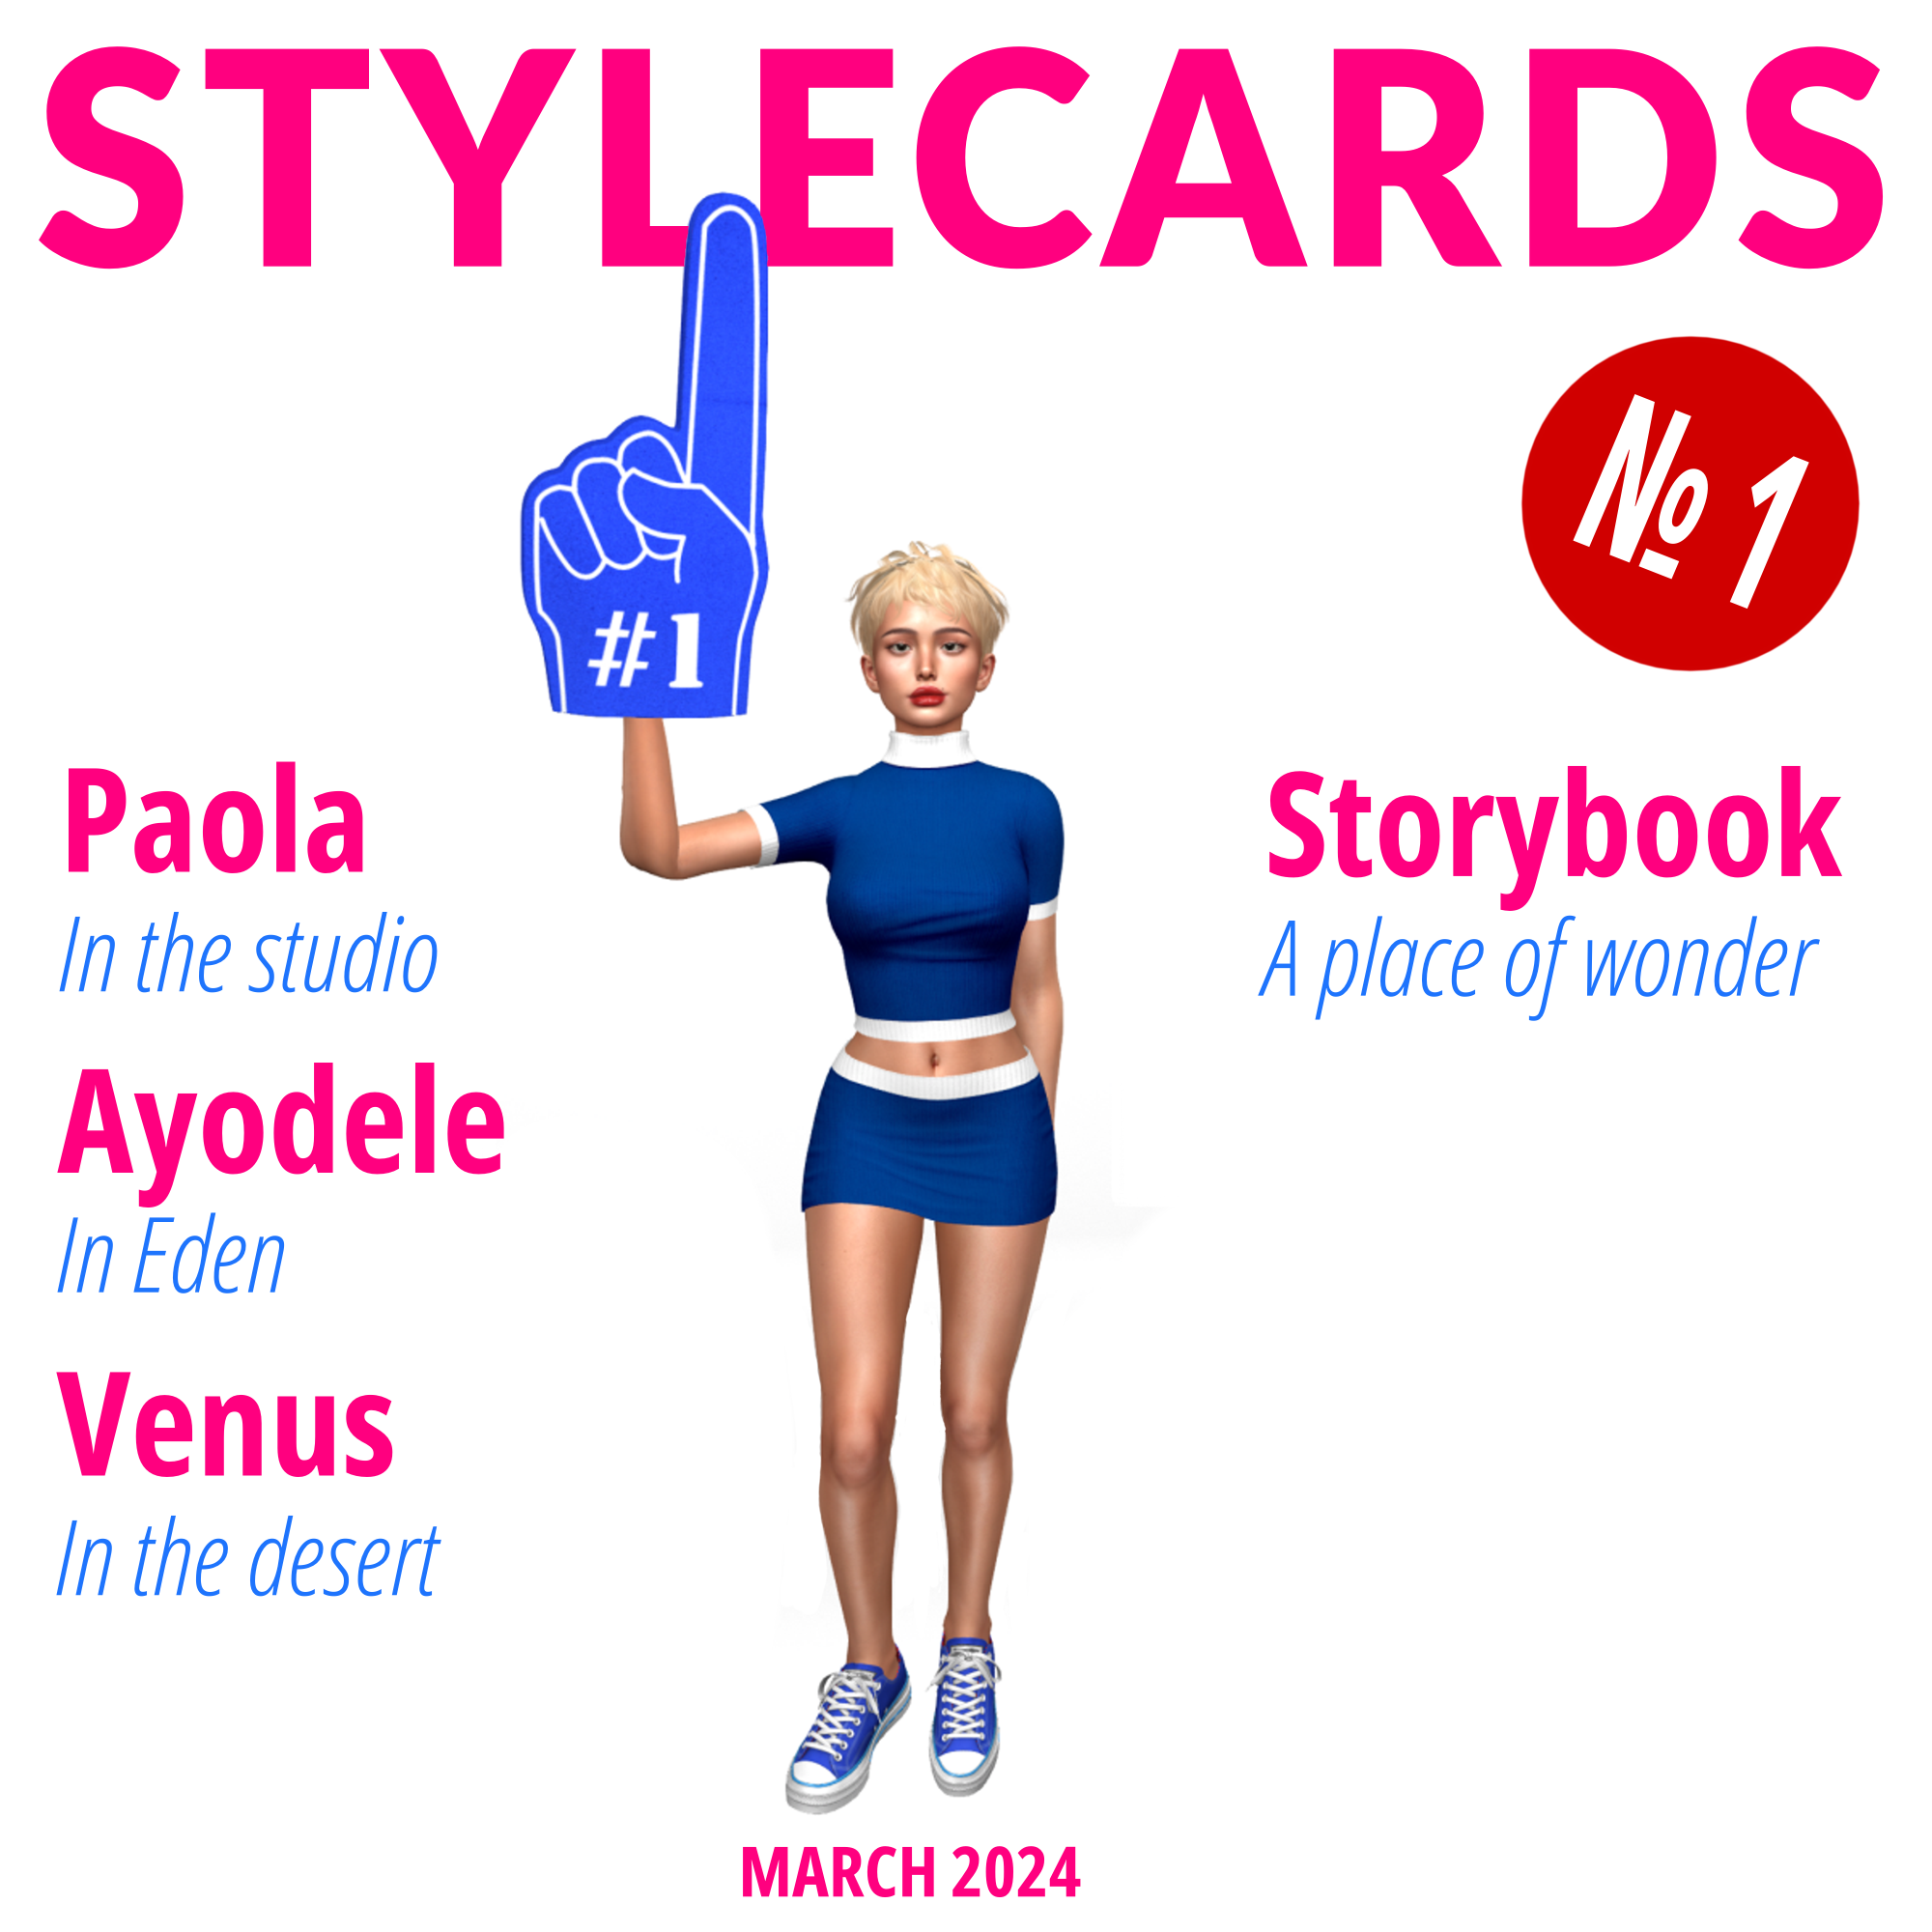 The cover of Stylecards № 1 features Paola de Melho wearing a matching blue crop top and miniskirt set trimmed with white.. She is standing in front of a white background and is posed with a blue foam finger with #1 printed on it